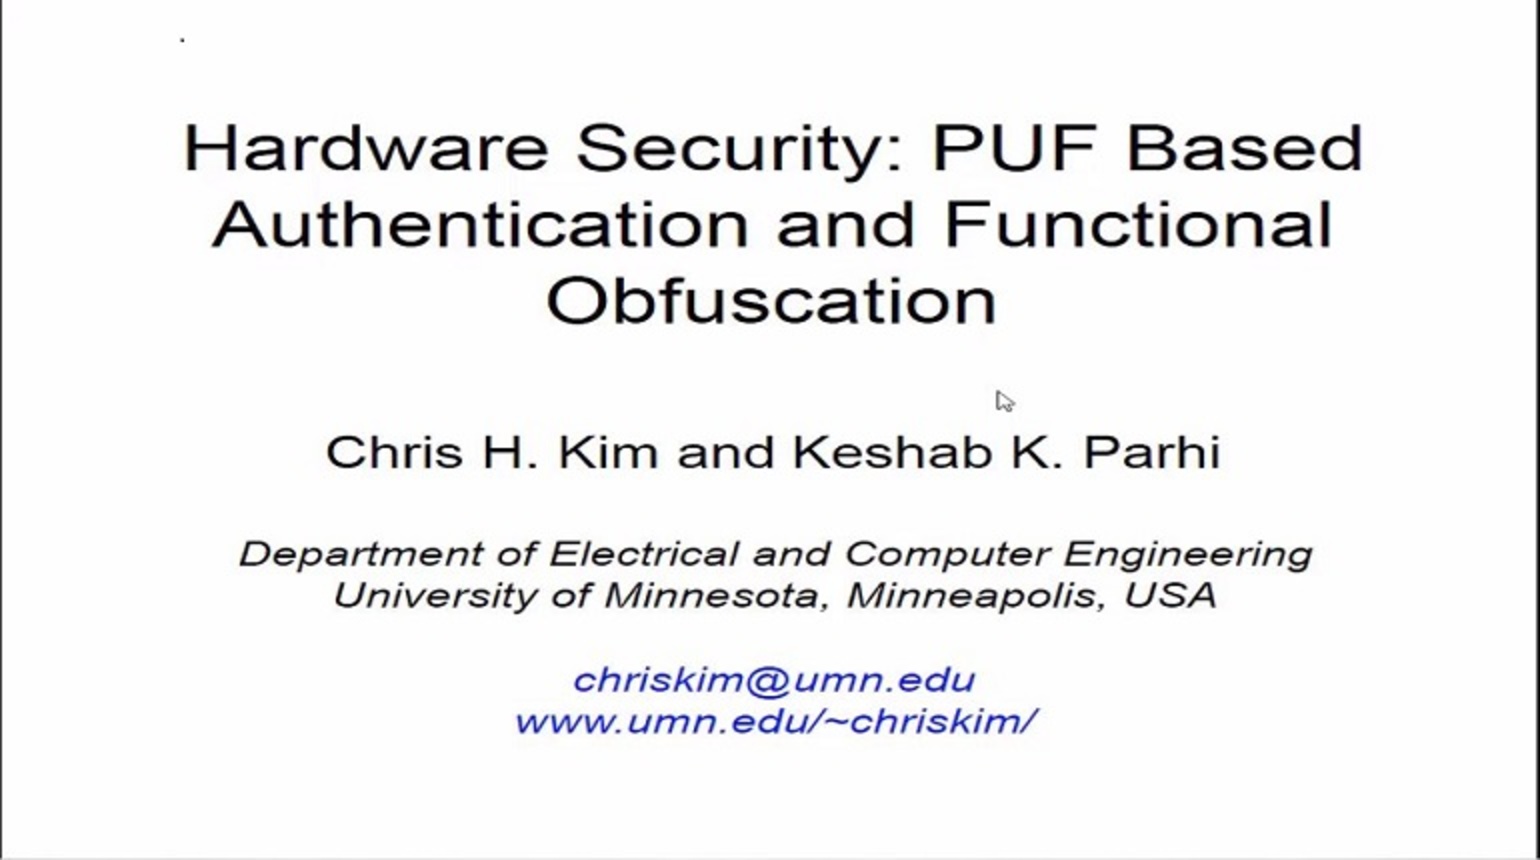 Hardware Security: PUF Based Authentication and Functional Obfuscation